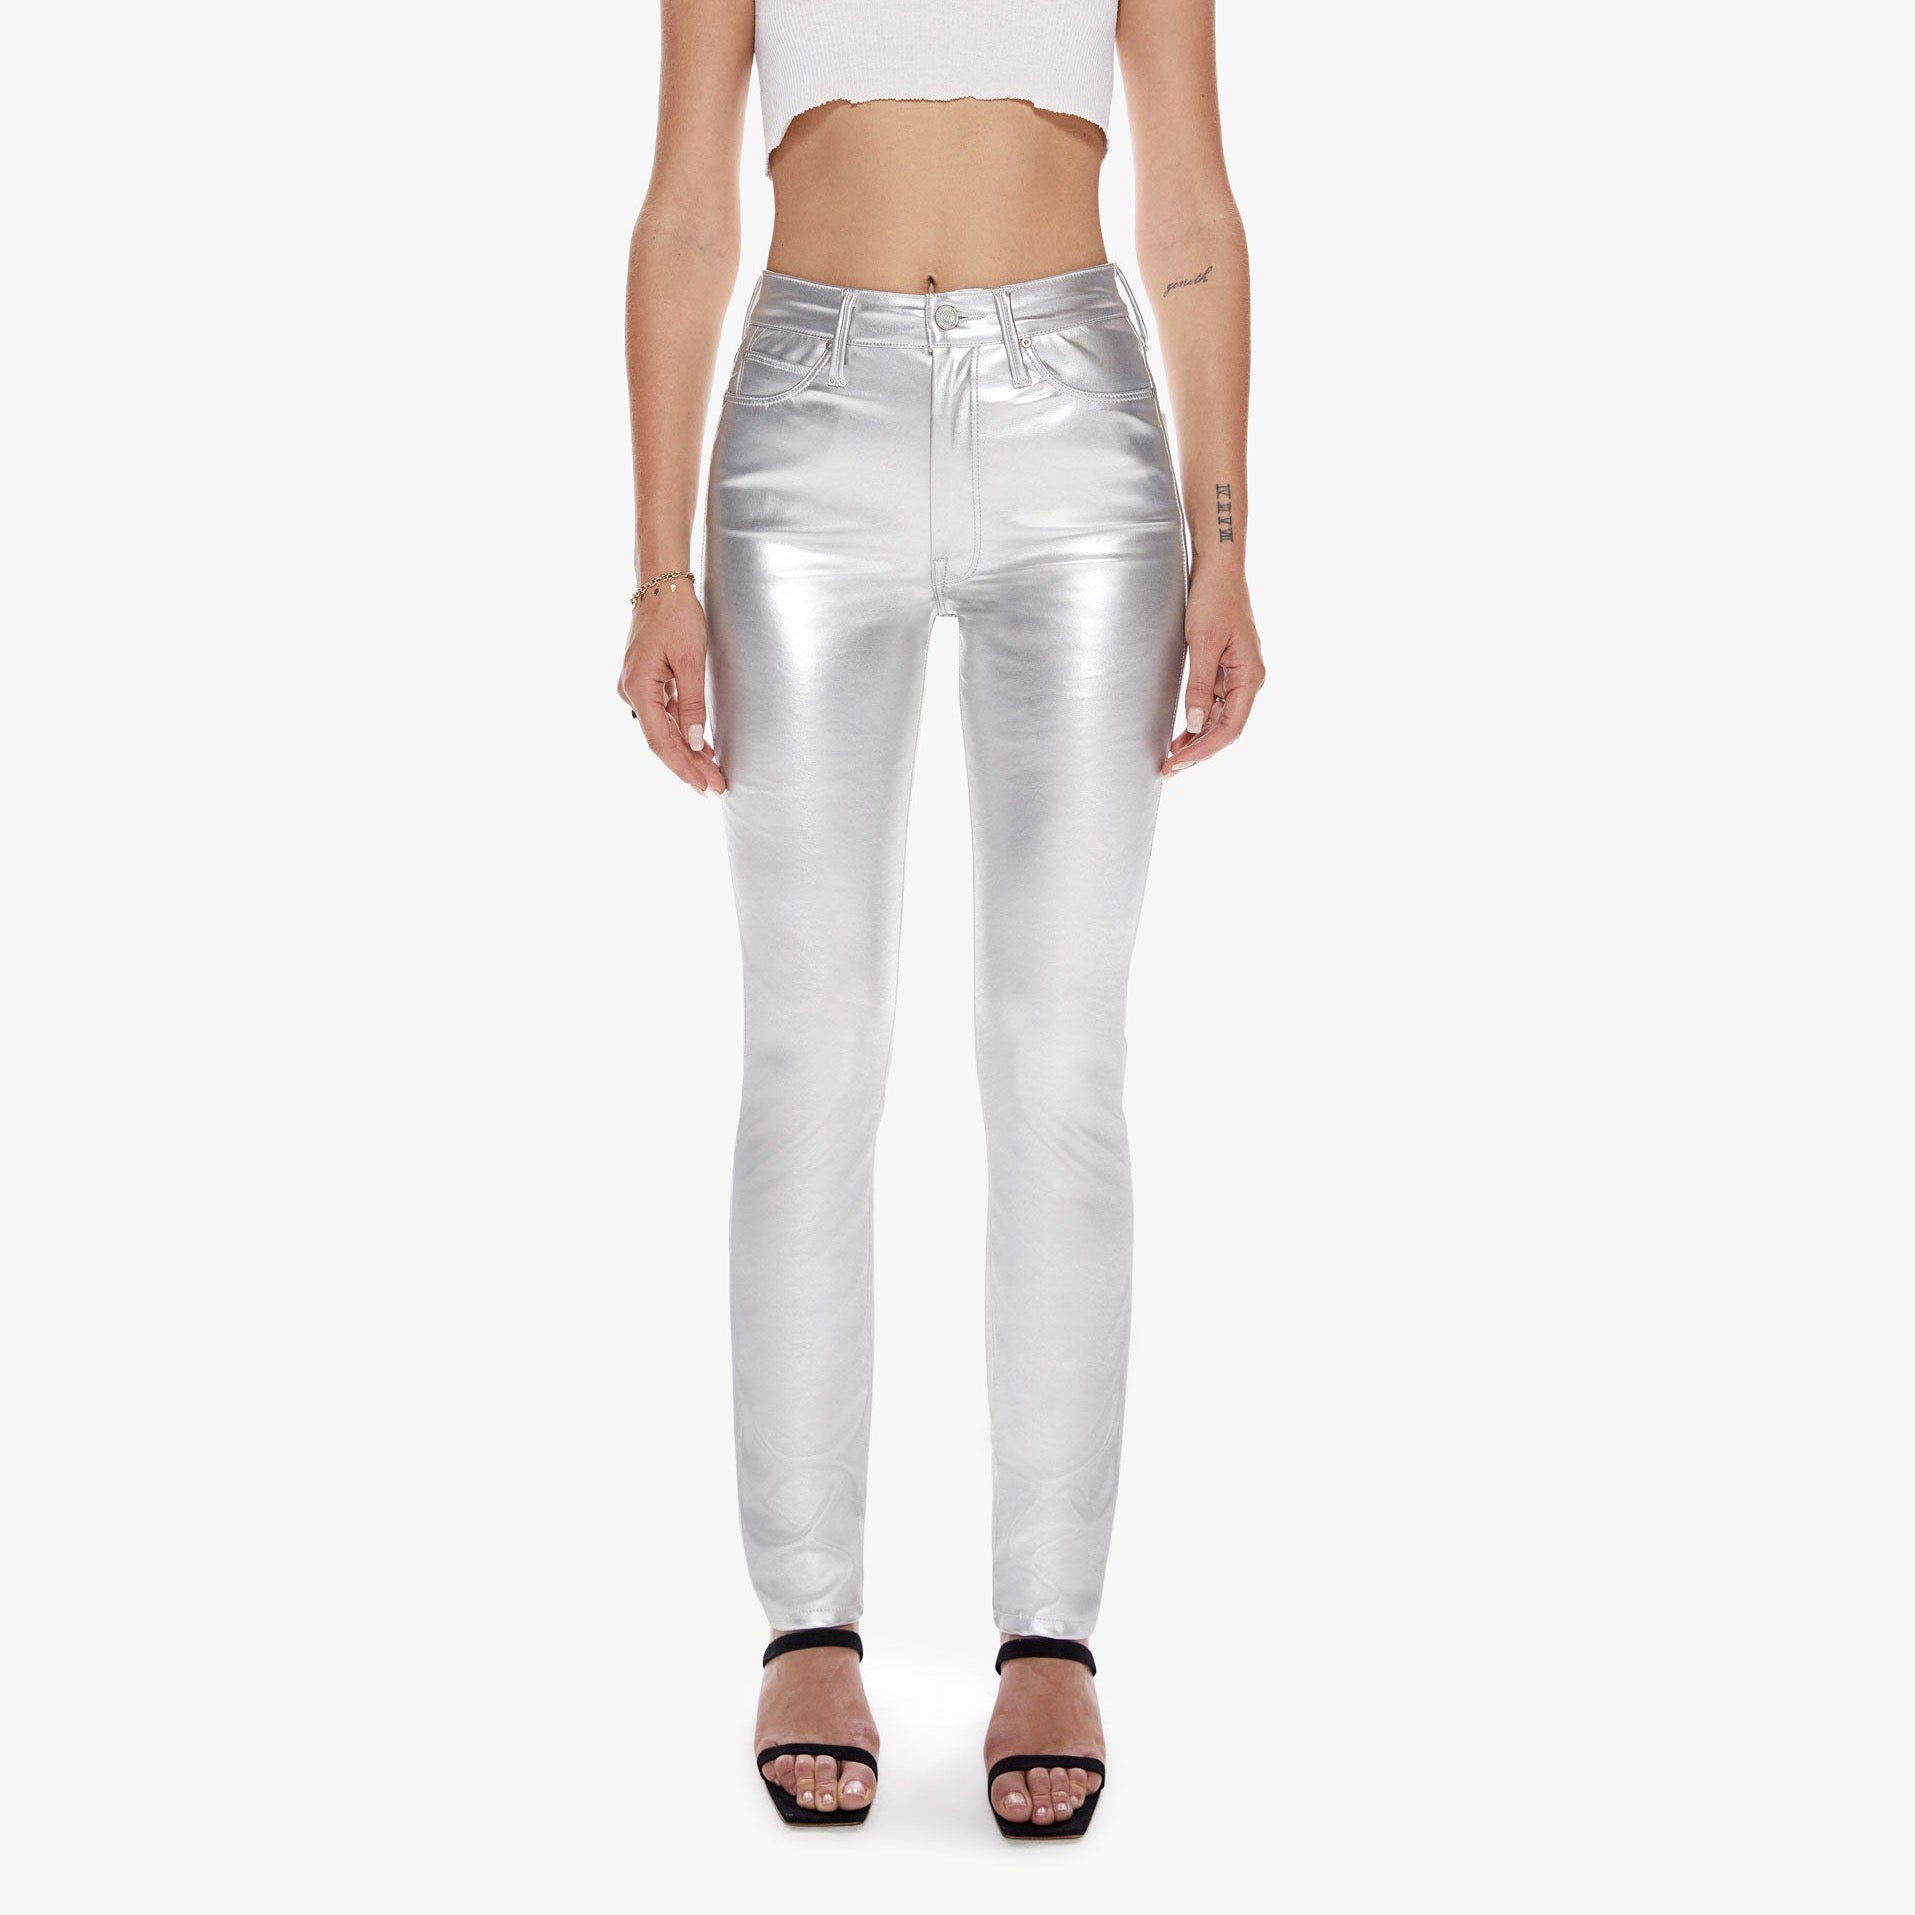 The Dazzler Skimp Pants in Rain or Shine Silver from MOTHER.